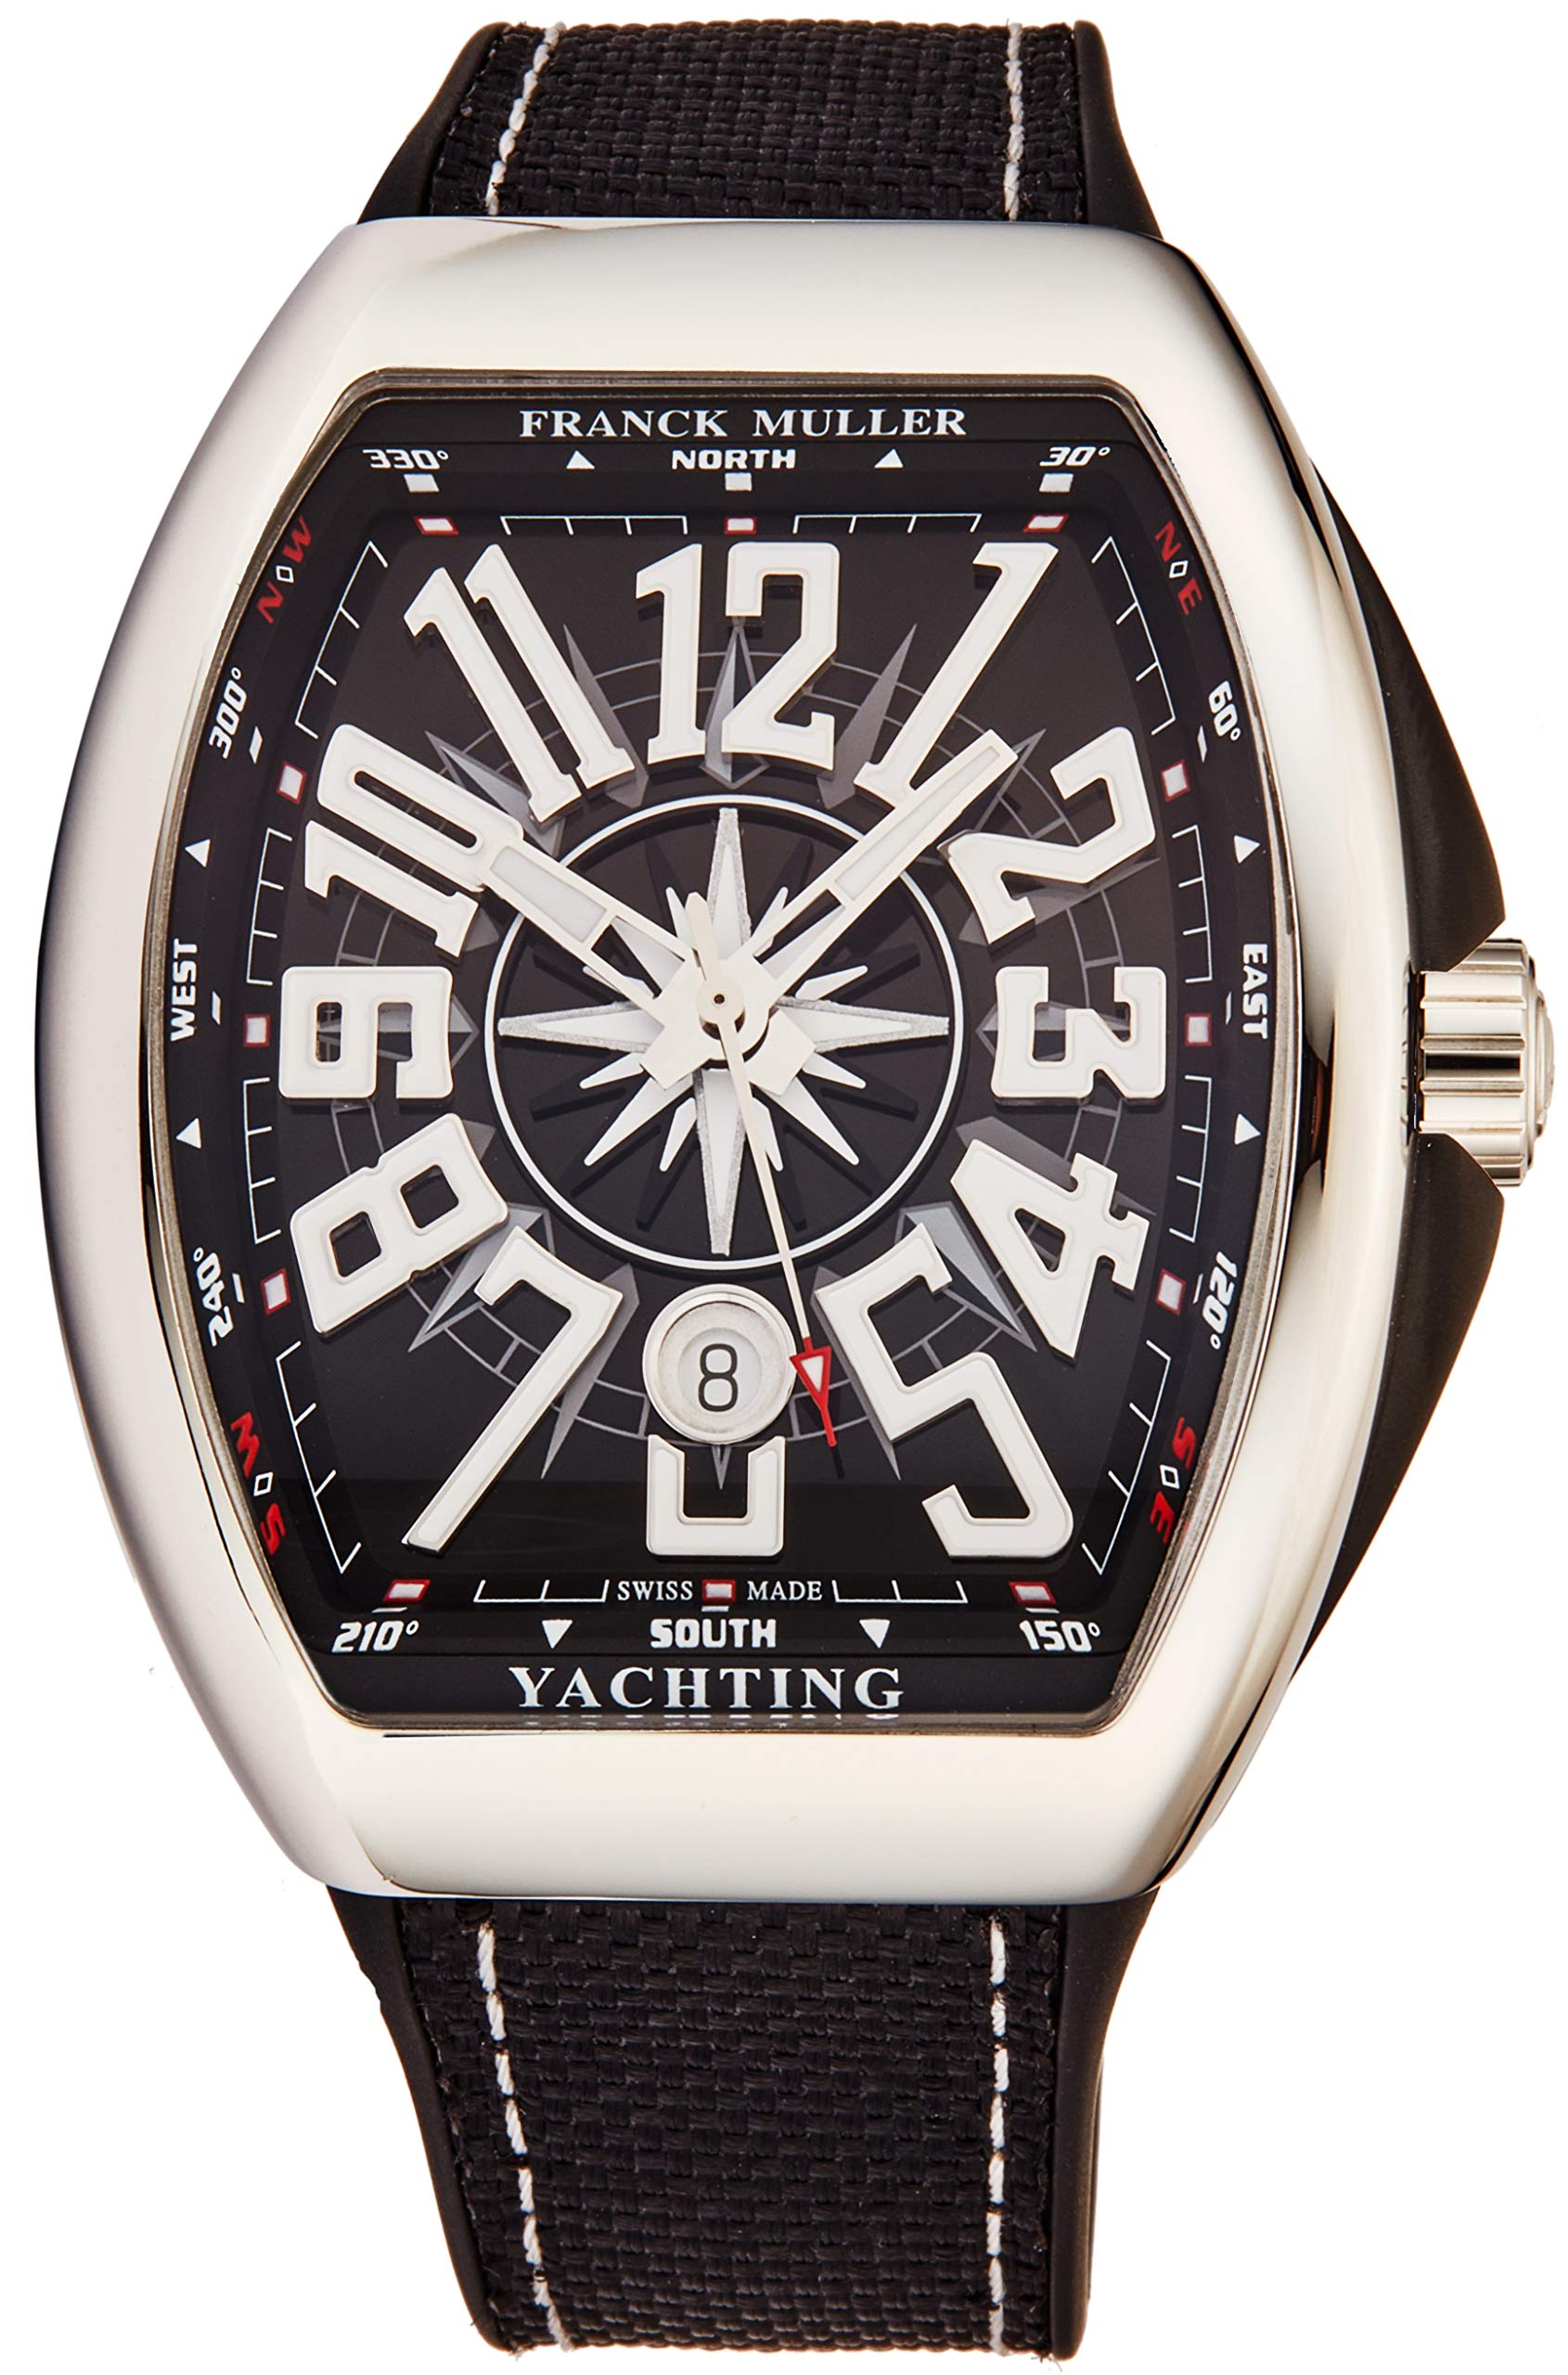 Franck Muller Vanguard Yachting Mens Stainless Steel Automatic Watch - Tonneau Black Face with Luminous Hands, Date and Sapphire Crystal - Black Fabric/Rubber Strap Swiss Made Watch V 45 SC Yacht BLK